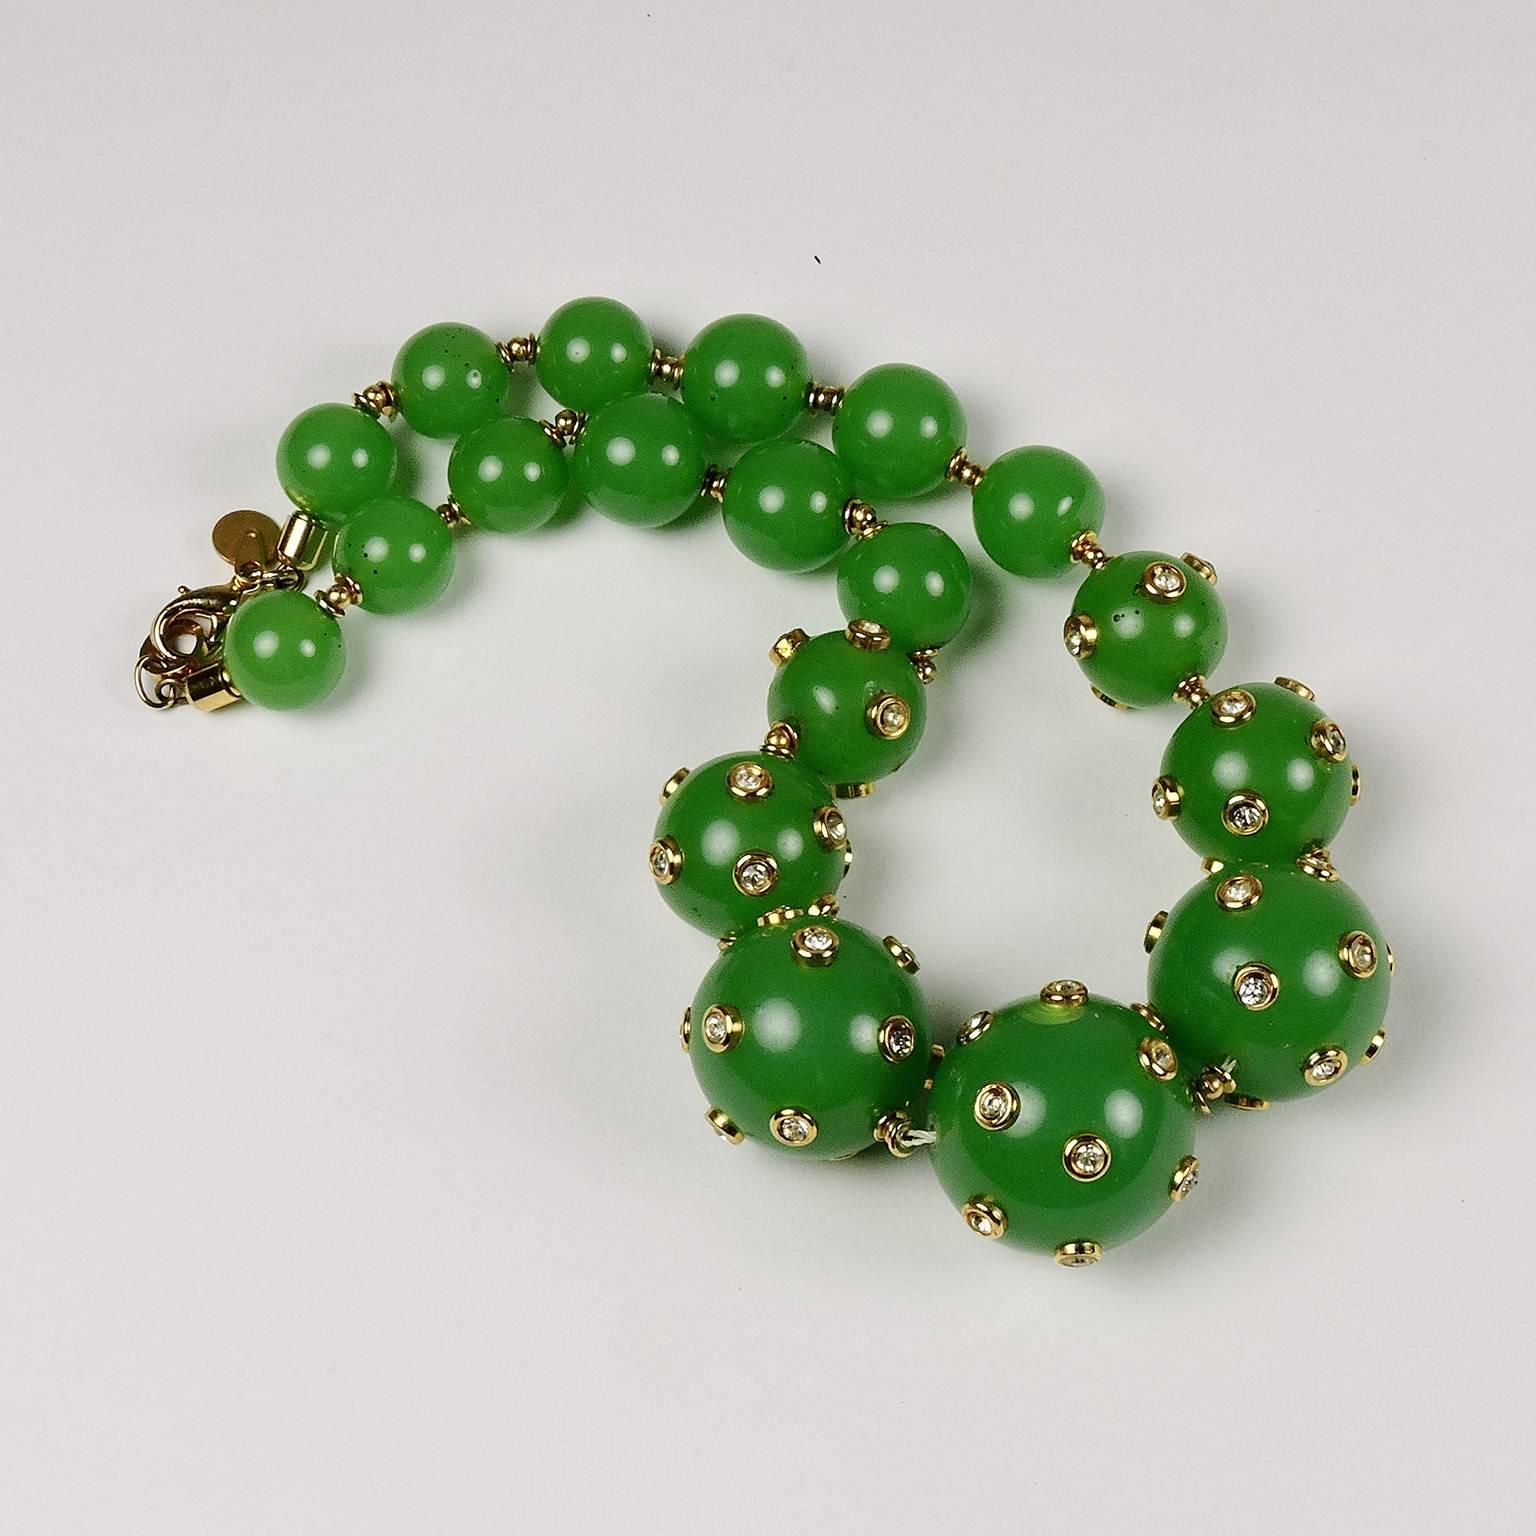 This festive vintage Valentino Garavani graduated green bead necklace is encrusted with crystal studs set in yellow gold tone mounts. A small pendant marked 